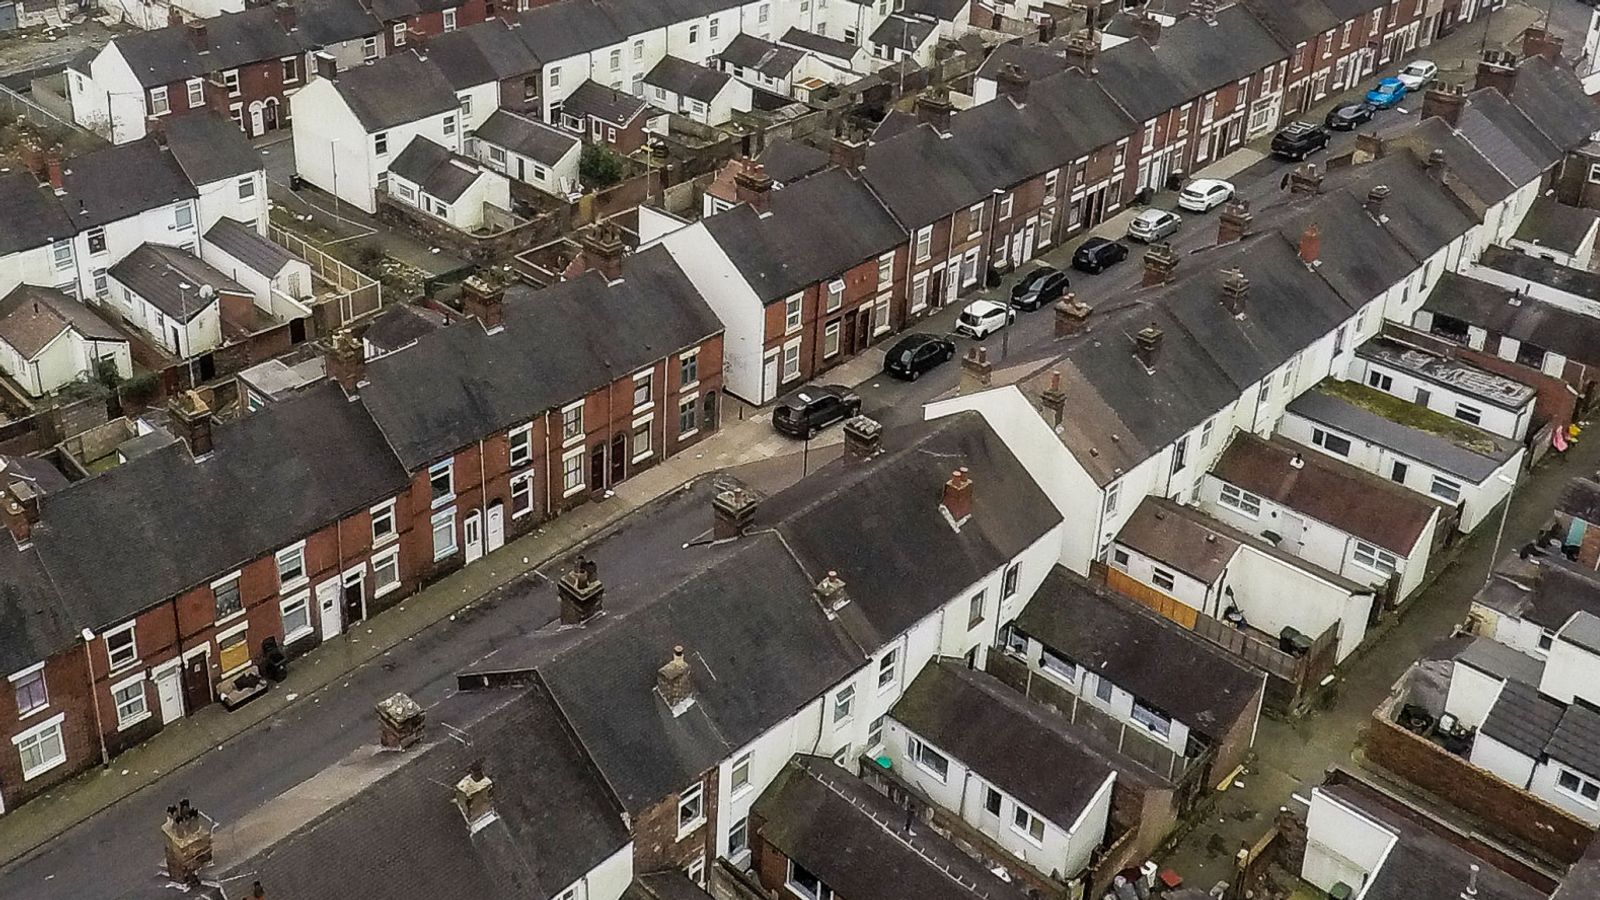 What immediate action could tackle 'out of control' rent prices?